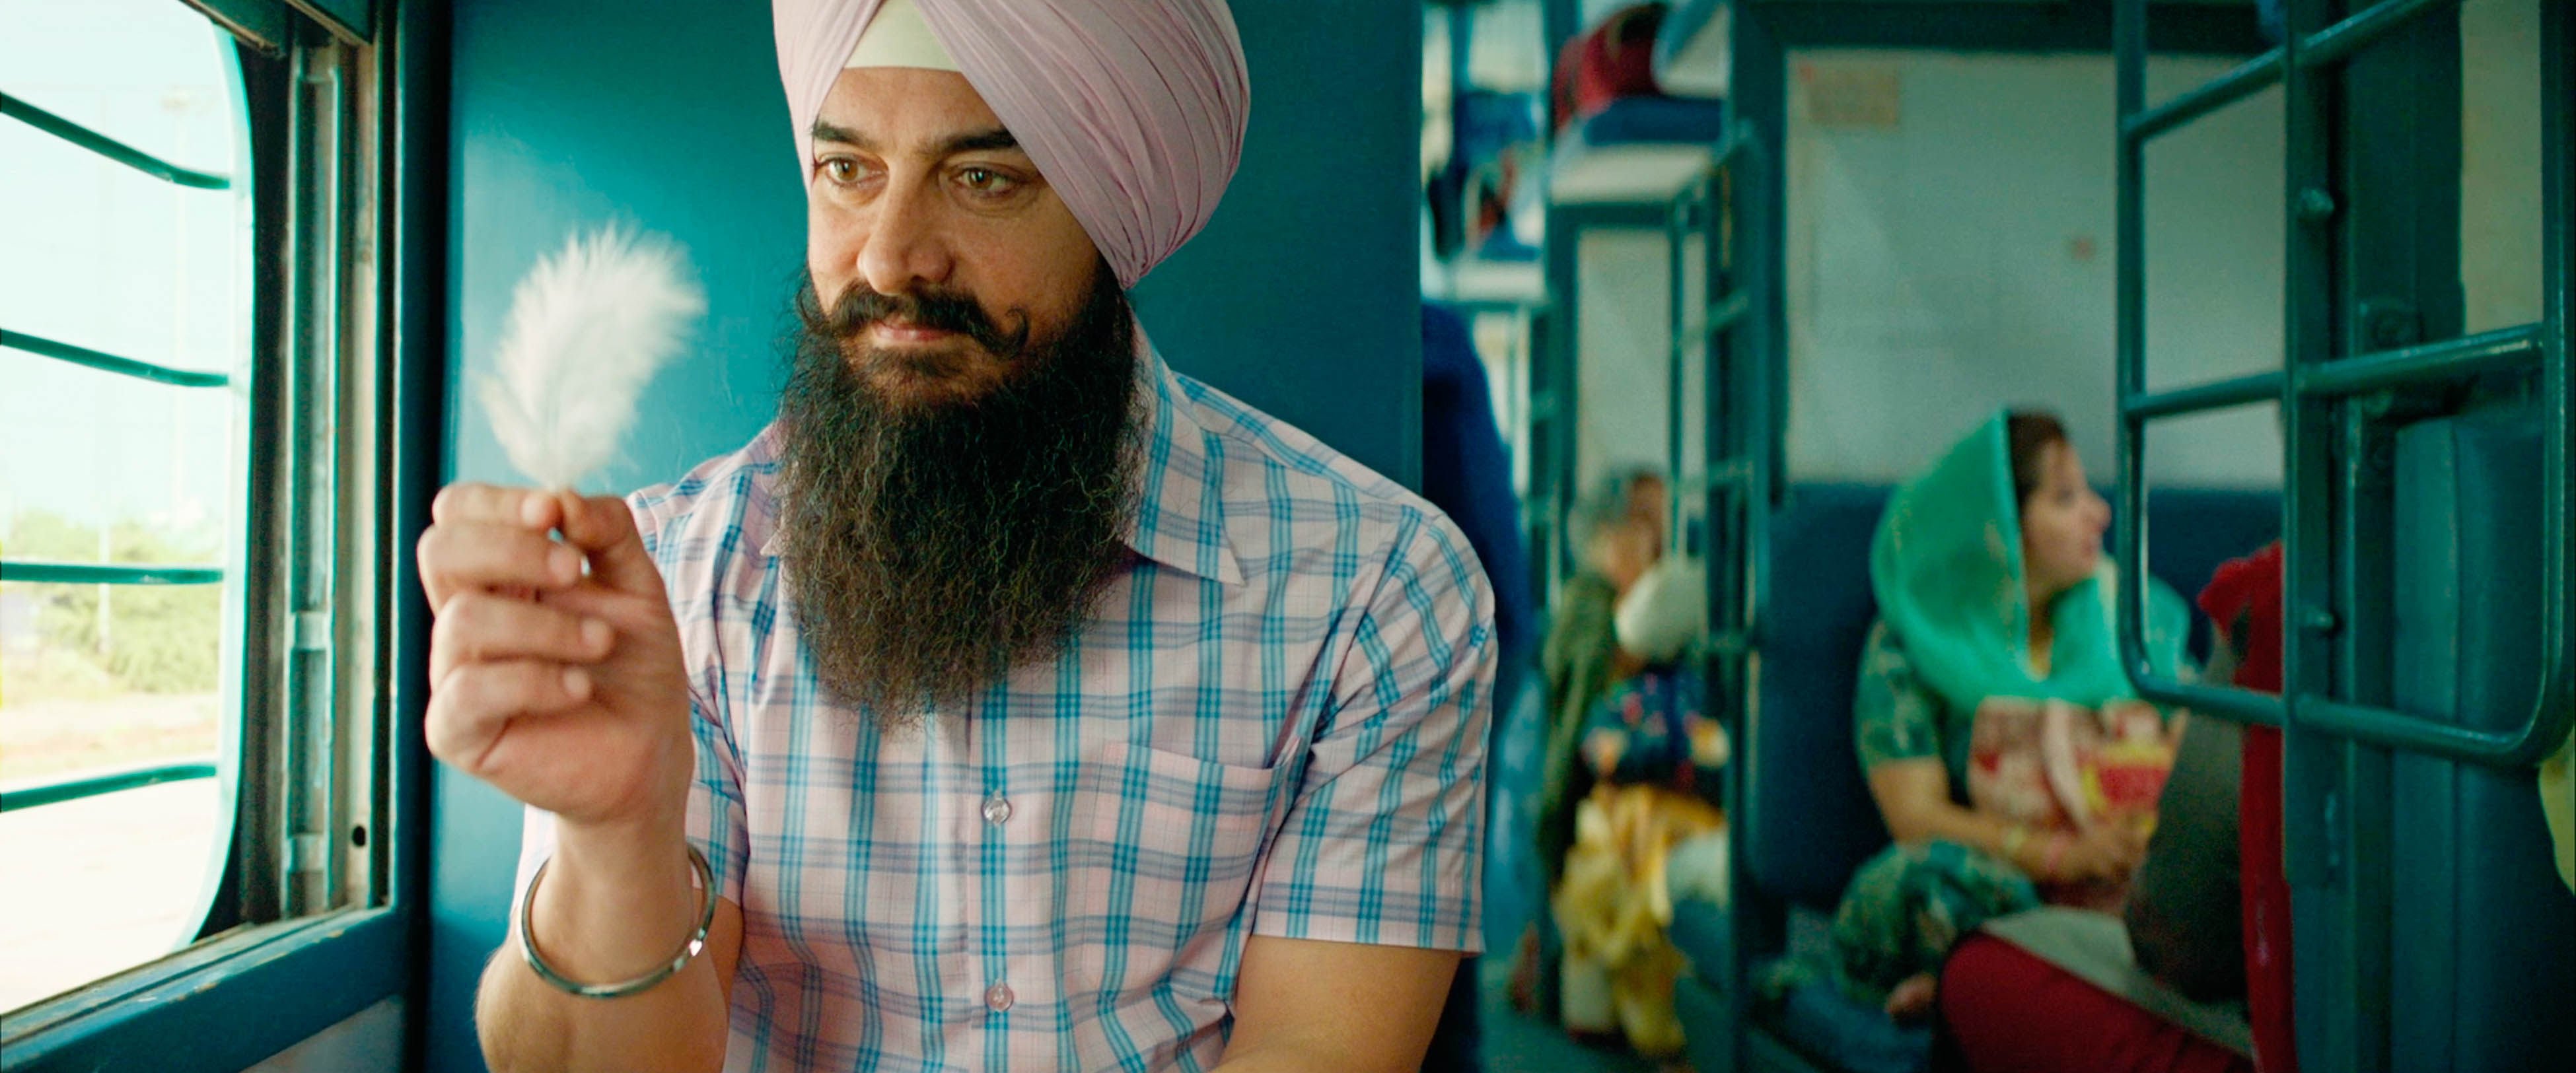 Laal Singh Chaddha' Movie Review: Aamir Khan Is Probably The Greatest  Storyteller Of Our Generation But - Entertainment